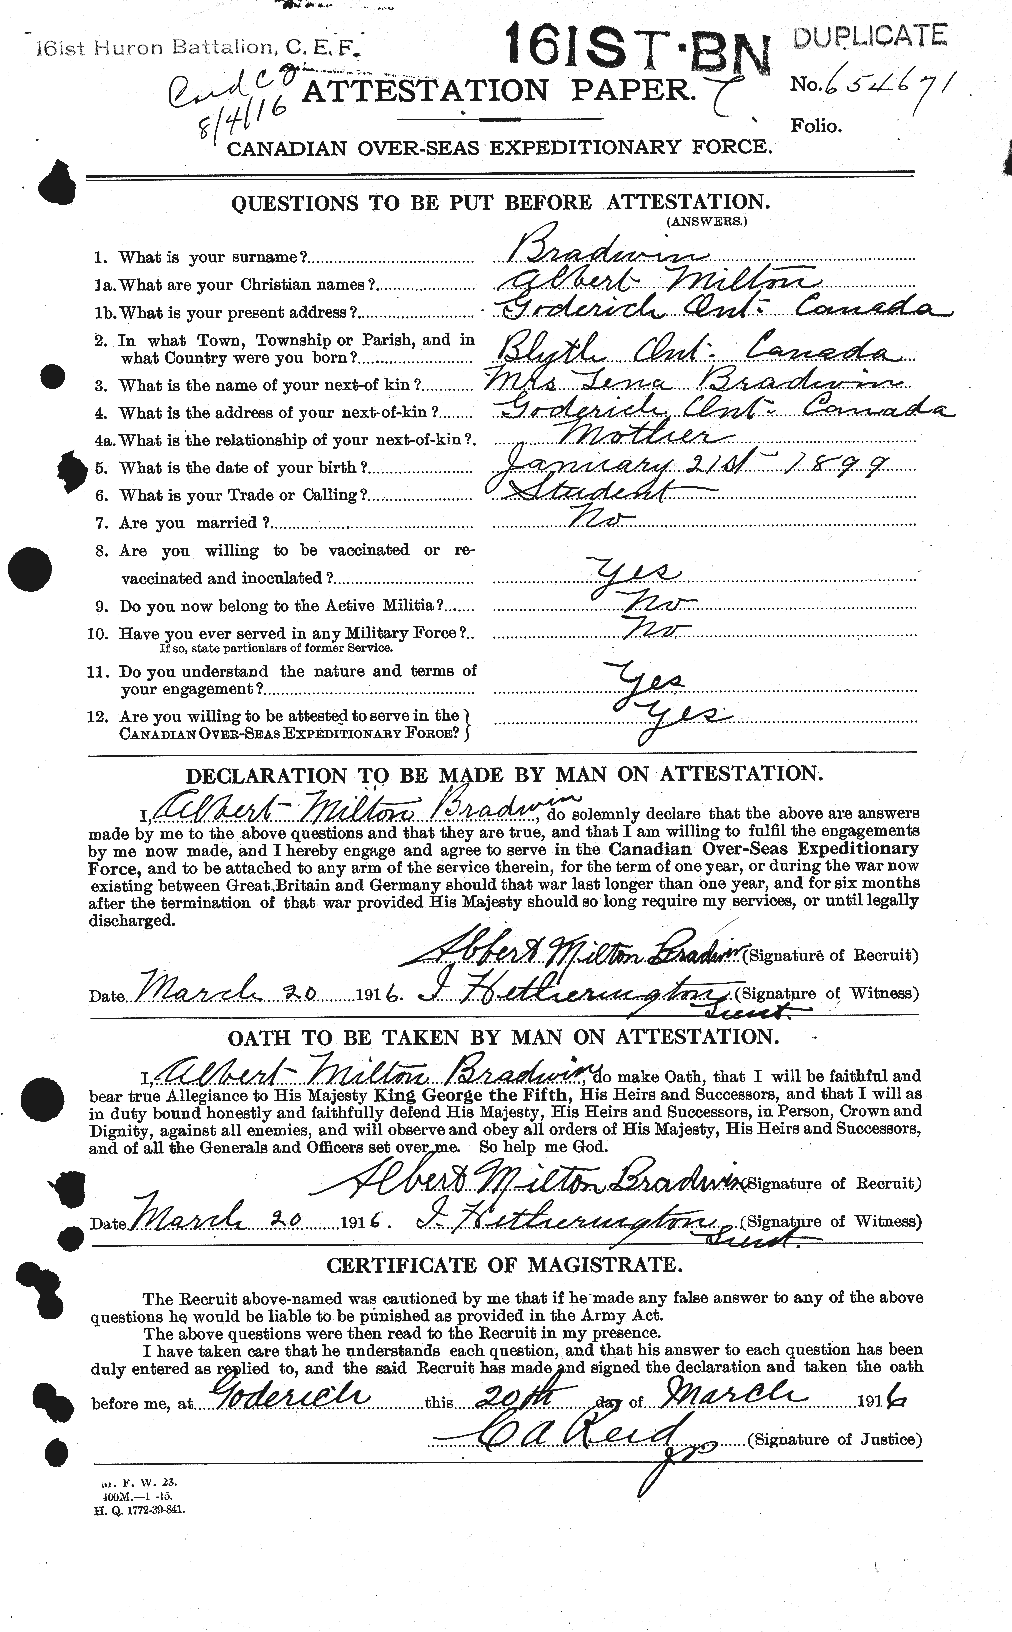 Personnel Records of the First World War - CEF 257103a